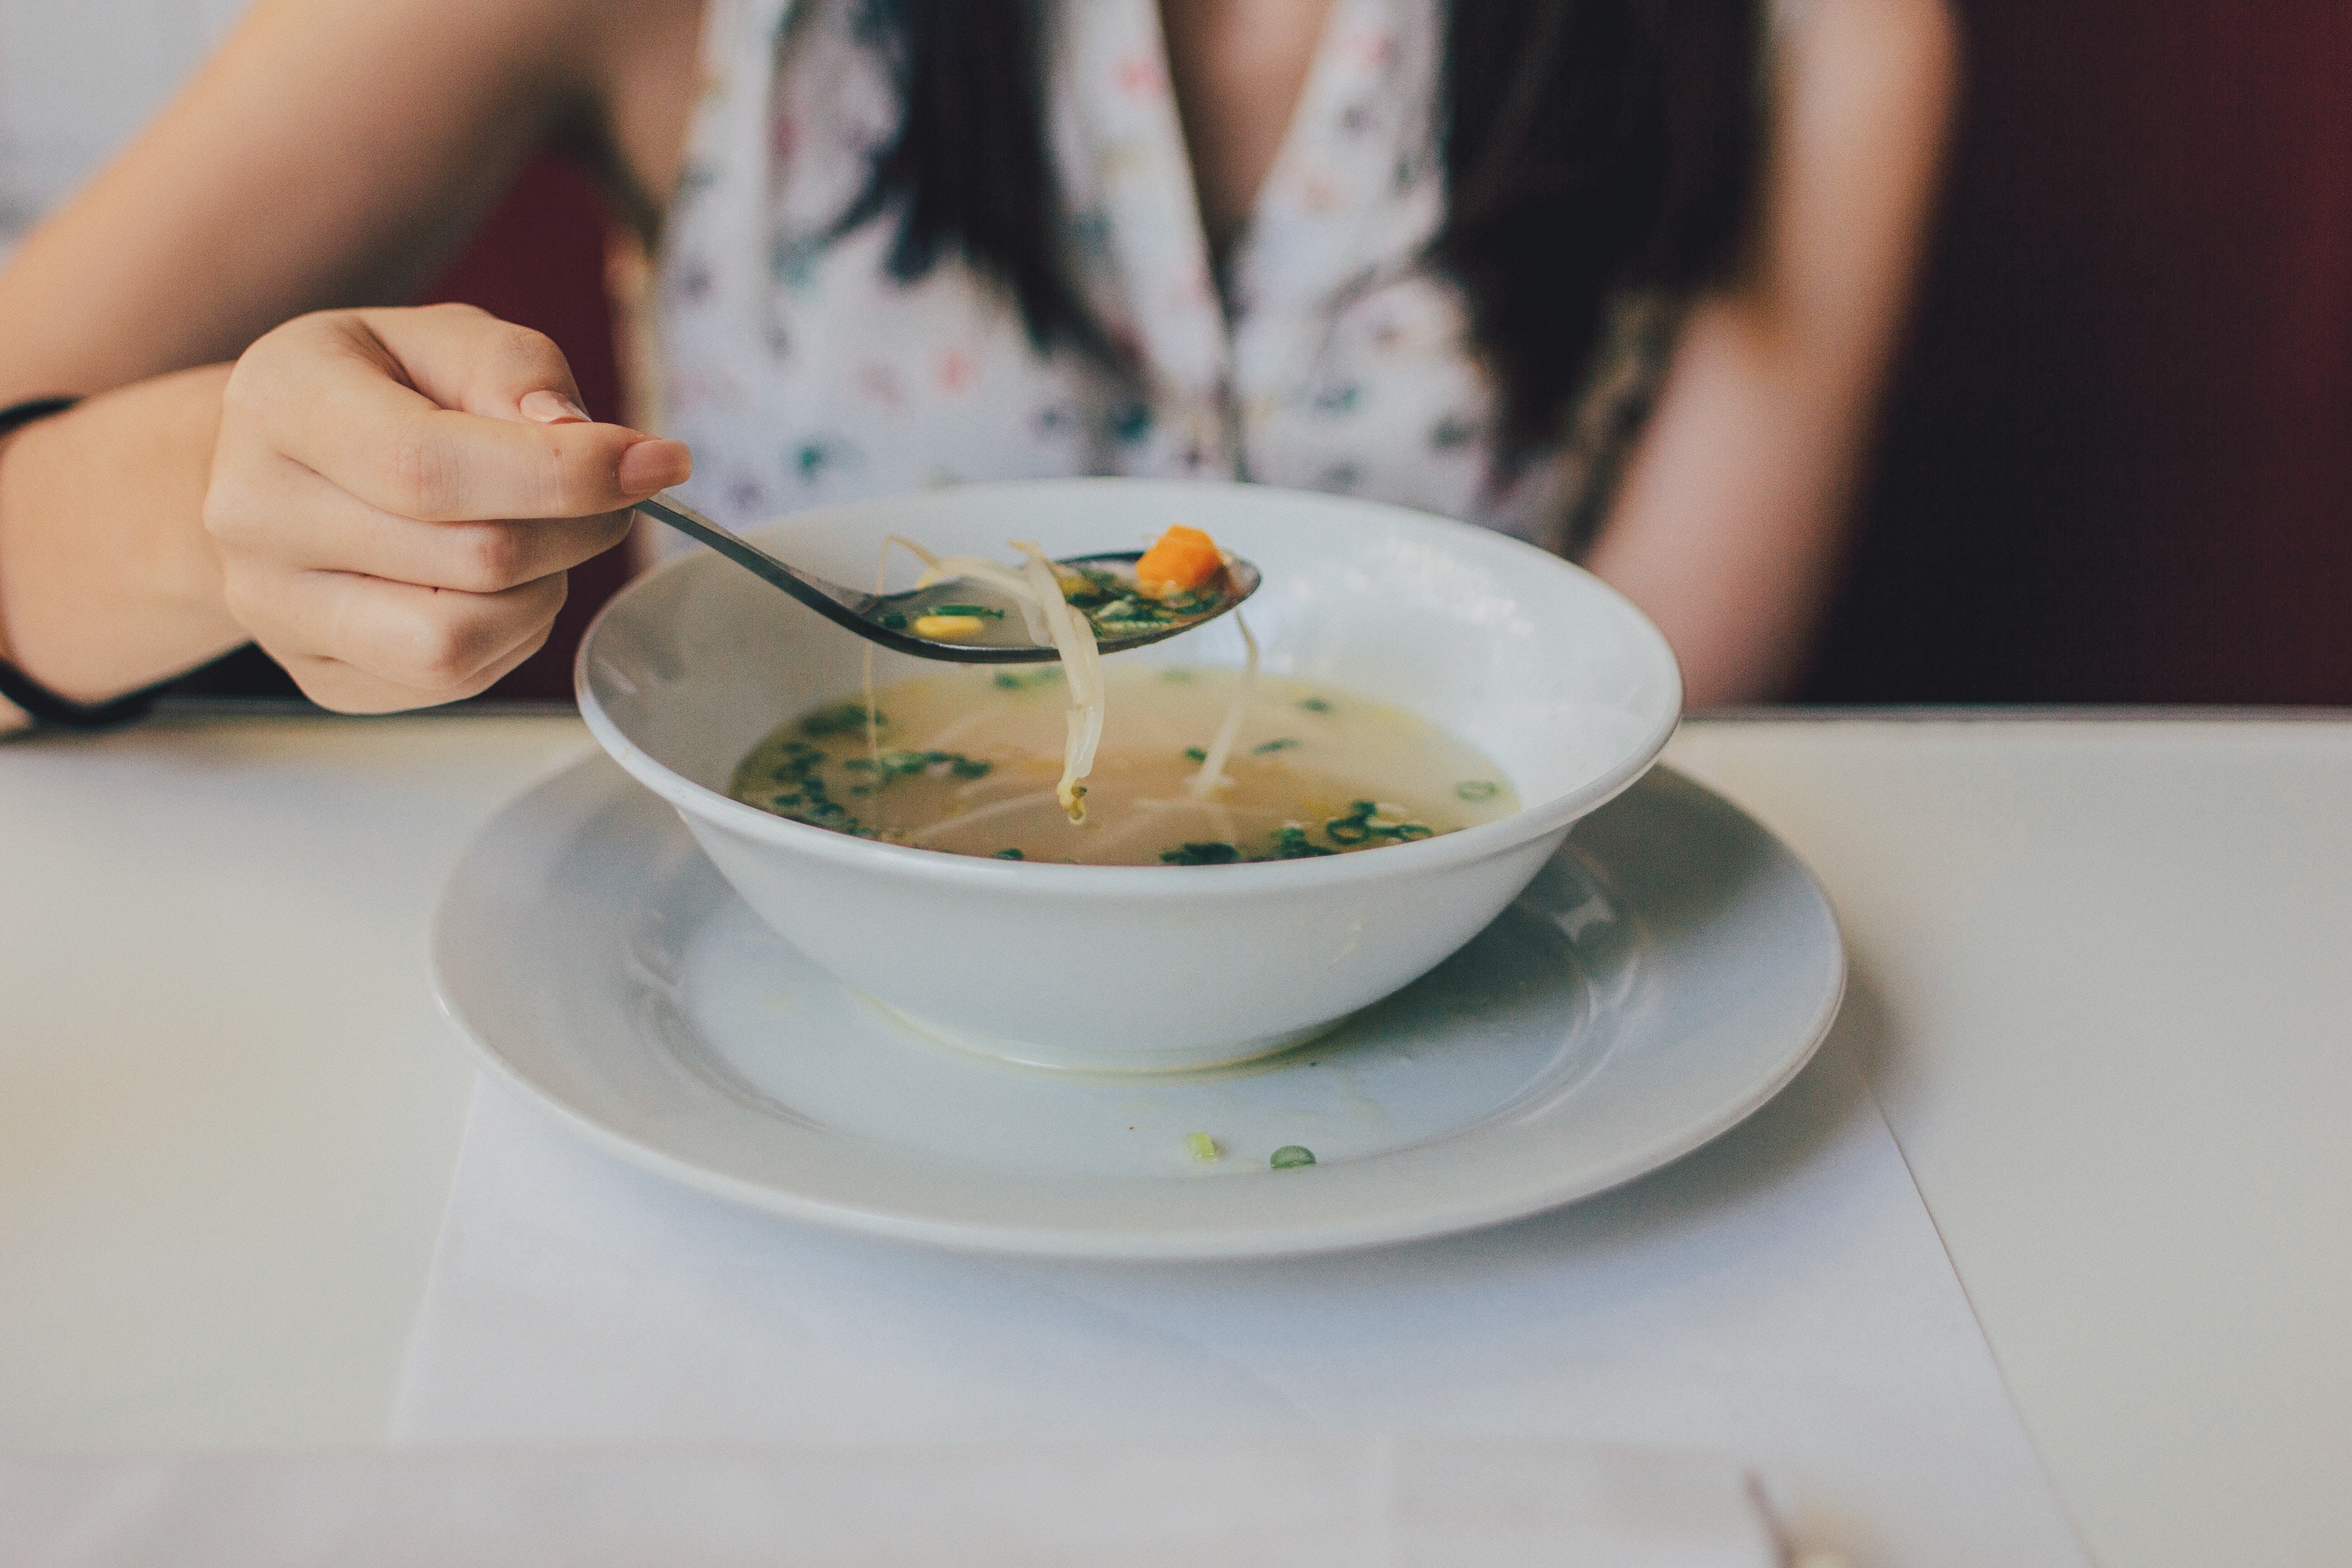 image: woman eating healthy soup at table